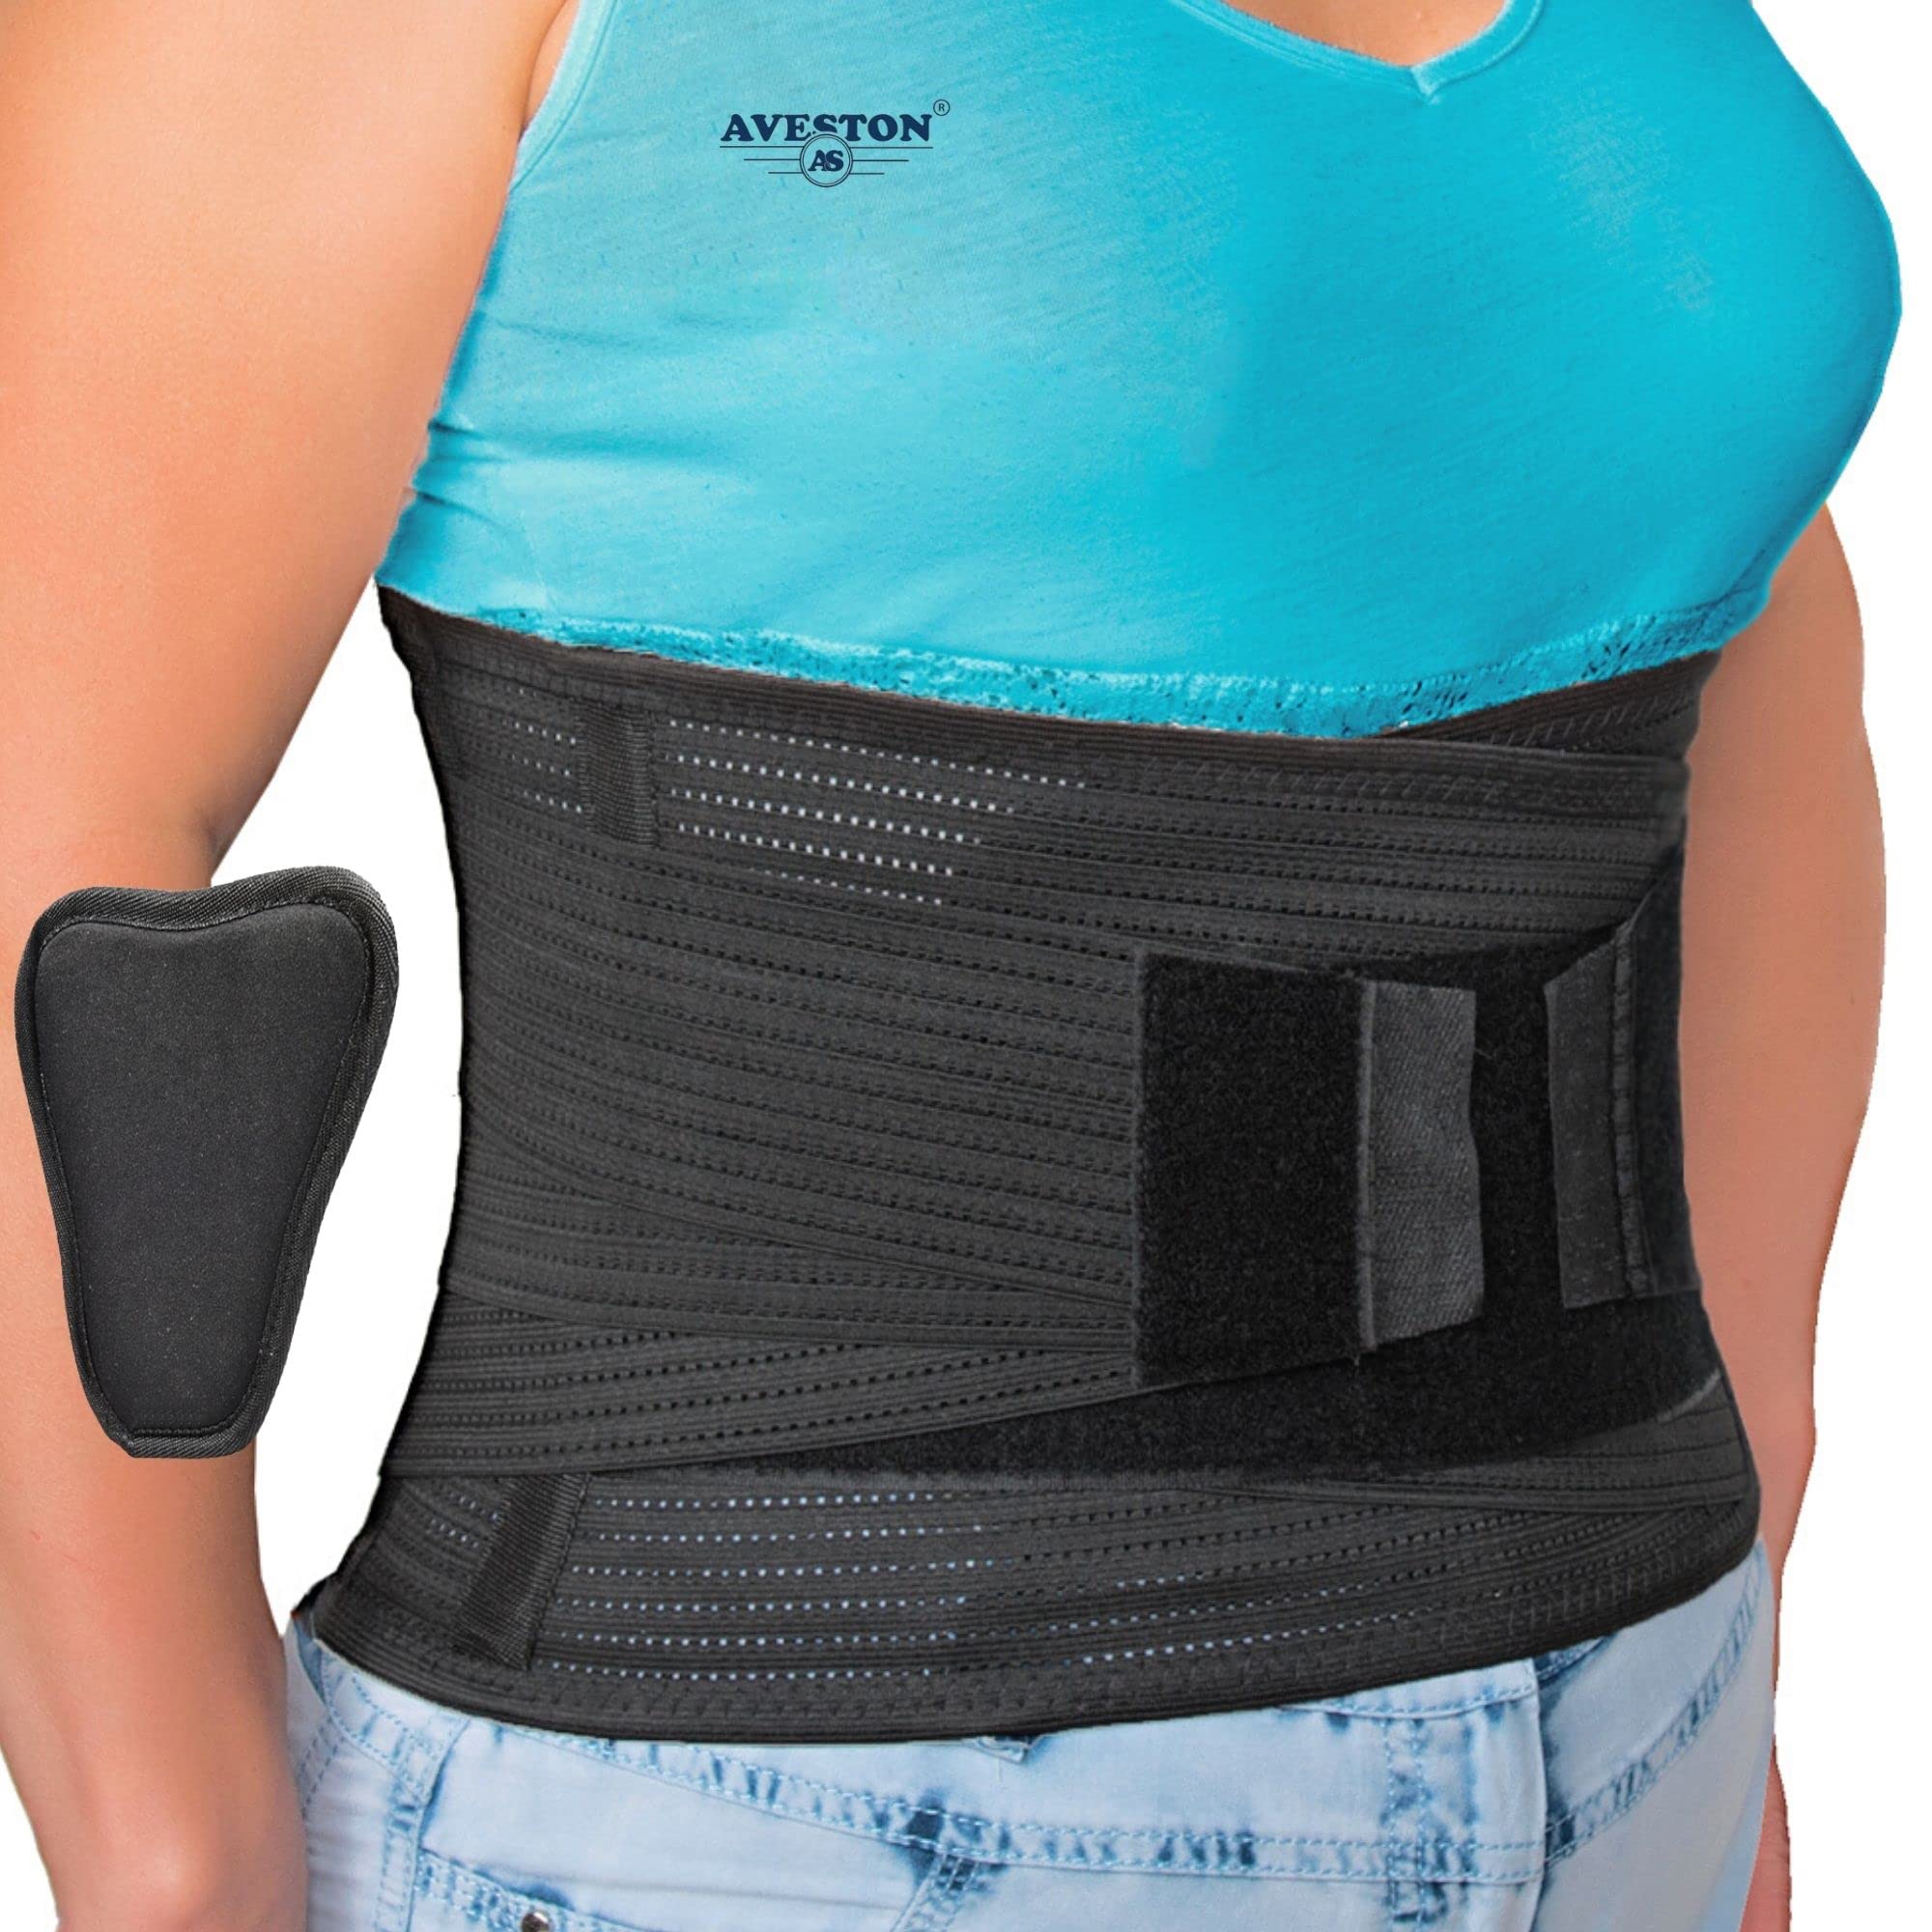 AVESTON Back Support Lower Back Brace for Back Pain Relief - Thin  Breathable Rigid 6 ribs Adjustable Lumbar Support Belt Men/Women Keeps Your  Spine Straight, Surgery, Fracture - Medium 32-37 Belly 